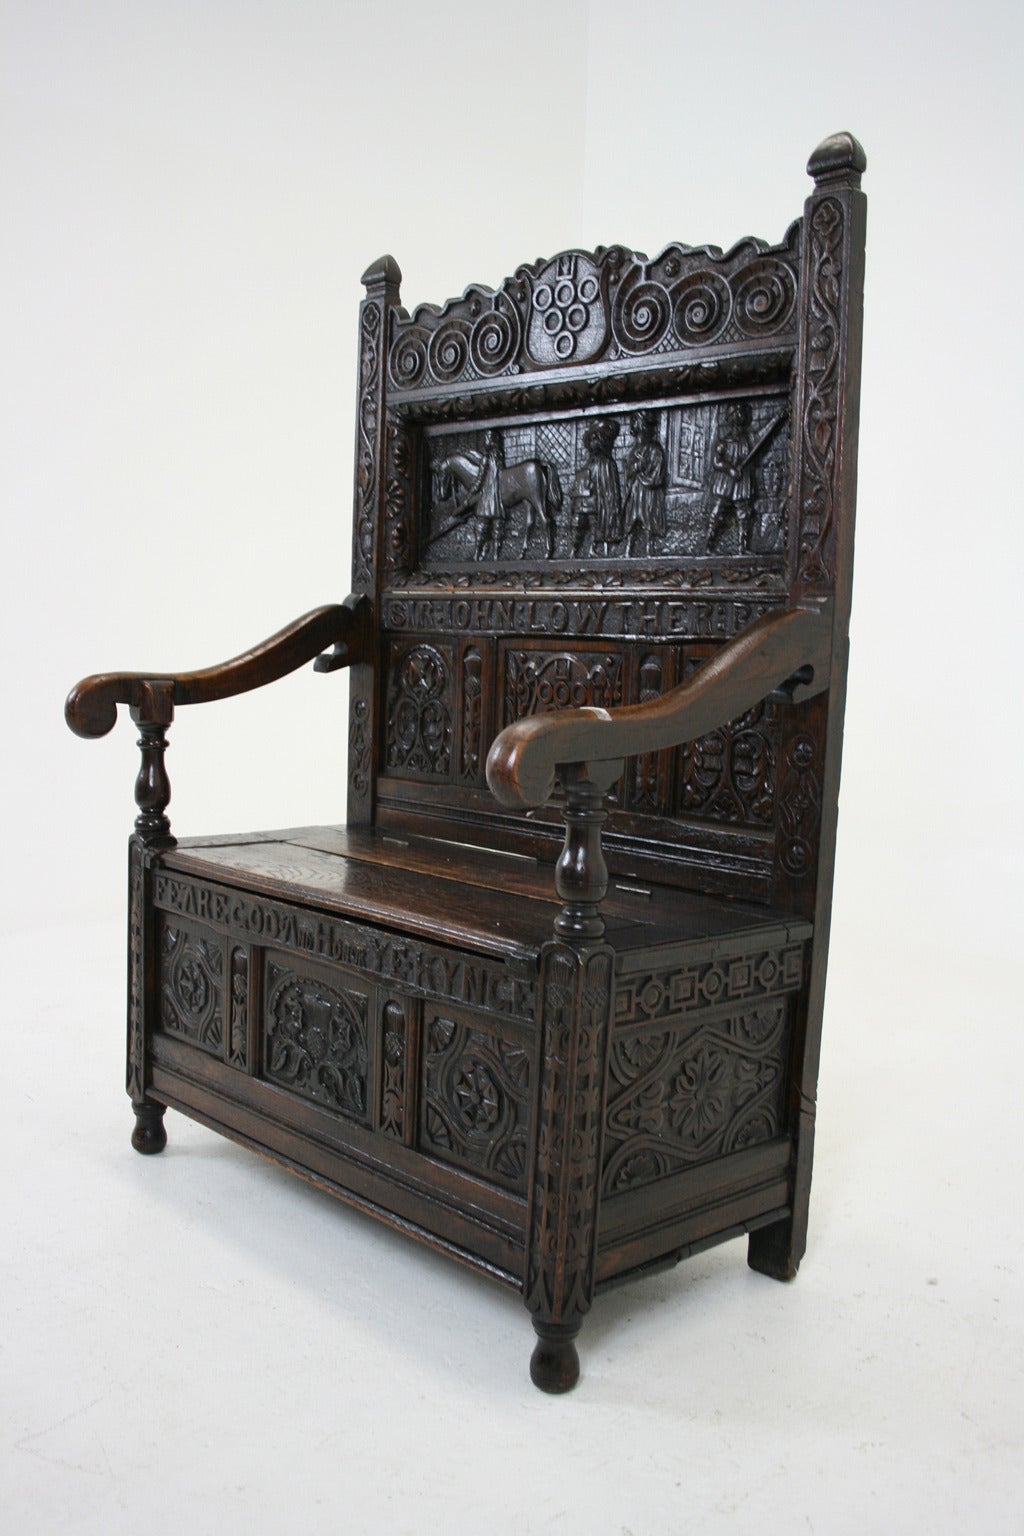 $3950.
England, 1780-1880.
Solid oak construction.
Provenance: Lowther Castle in Penrith, Cumbria.
 Heavily carved back panel.
Jacobean dress coat of arms.
Carving reads: Sir John Lowther Bart. and lower carving reads: Feare God And Honor Ye